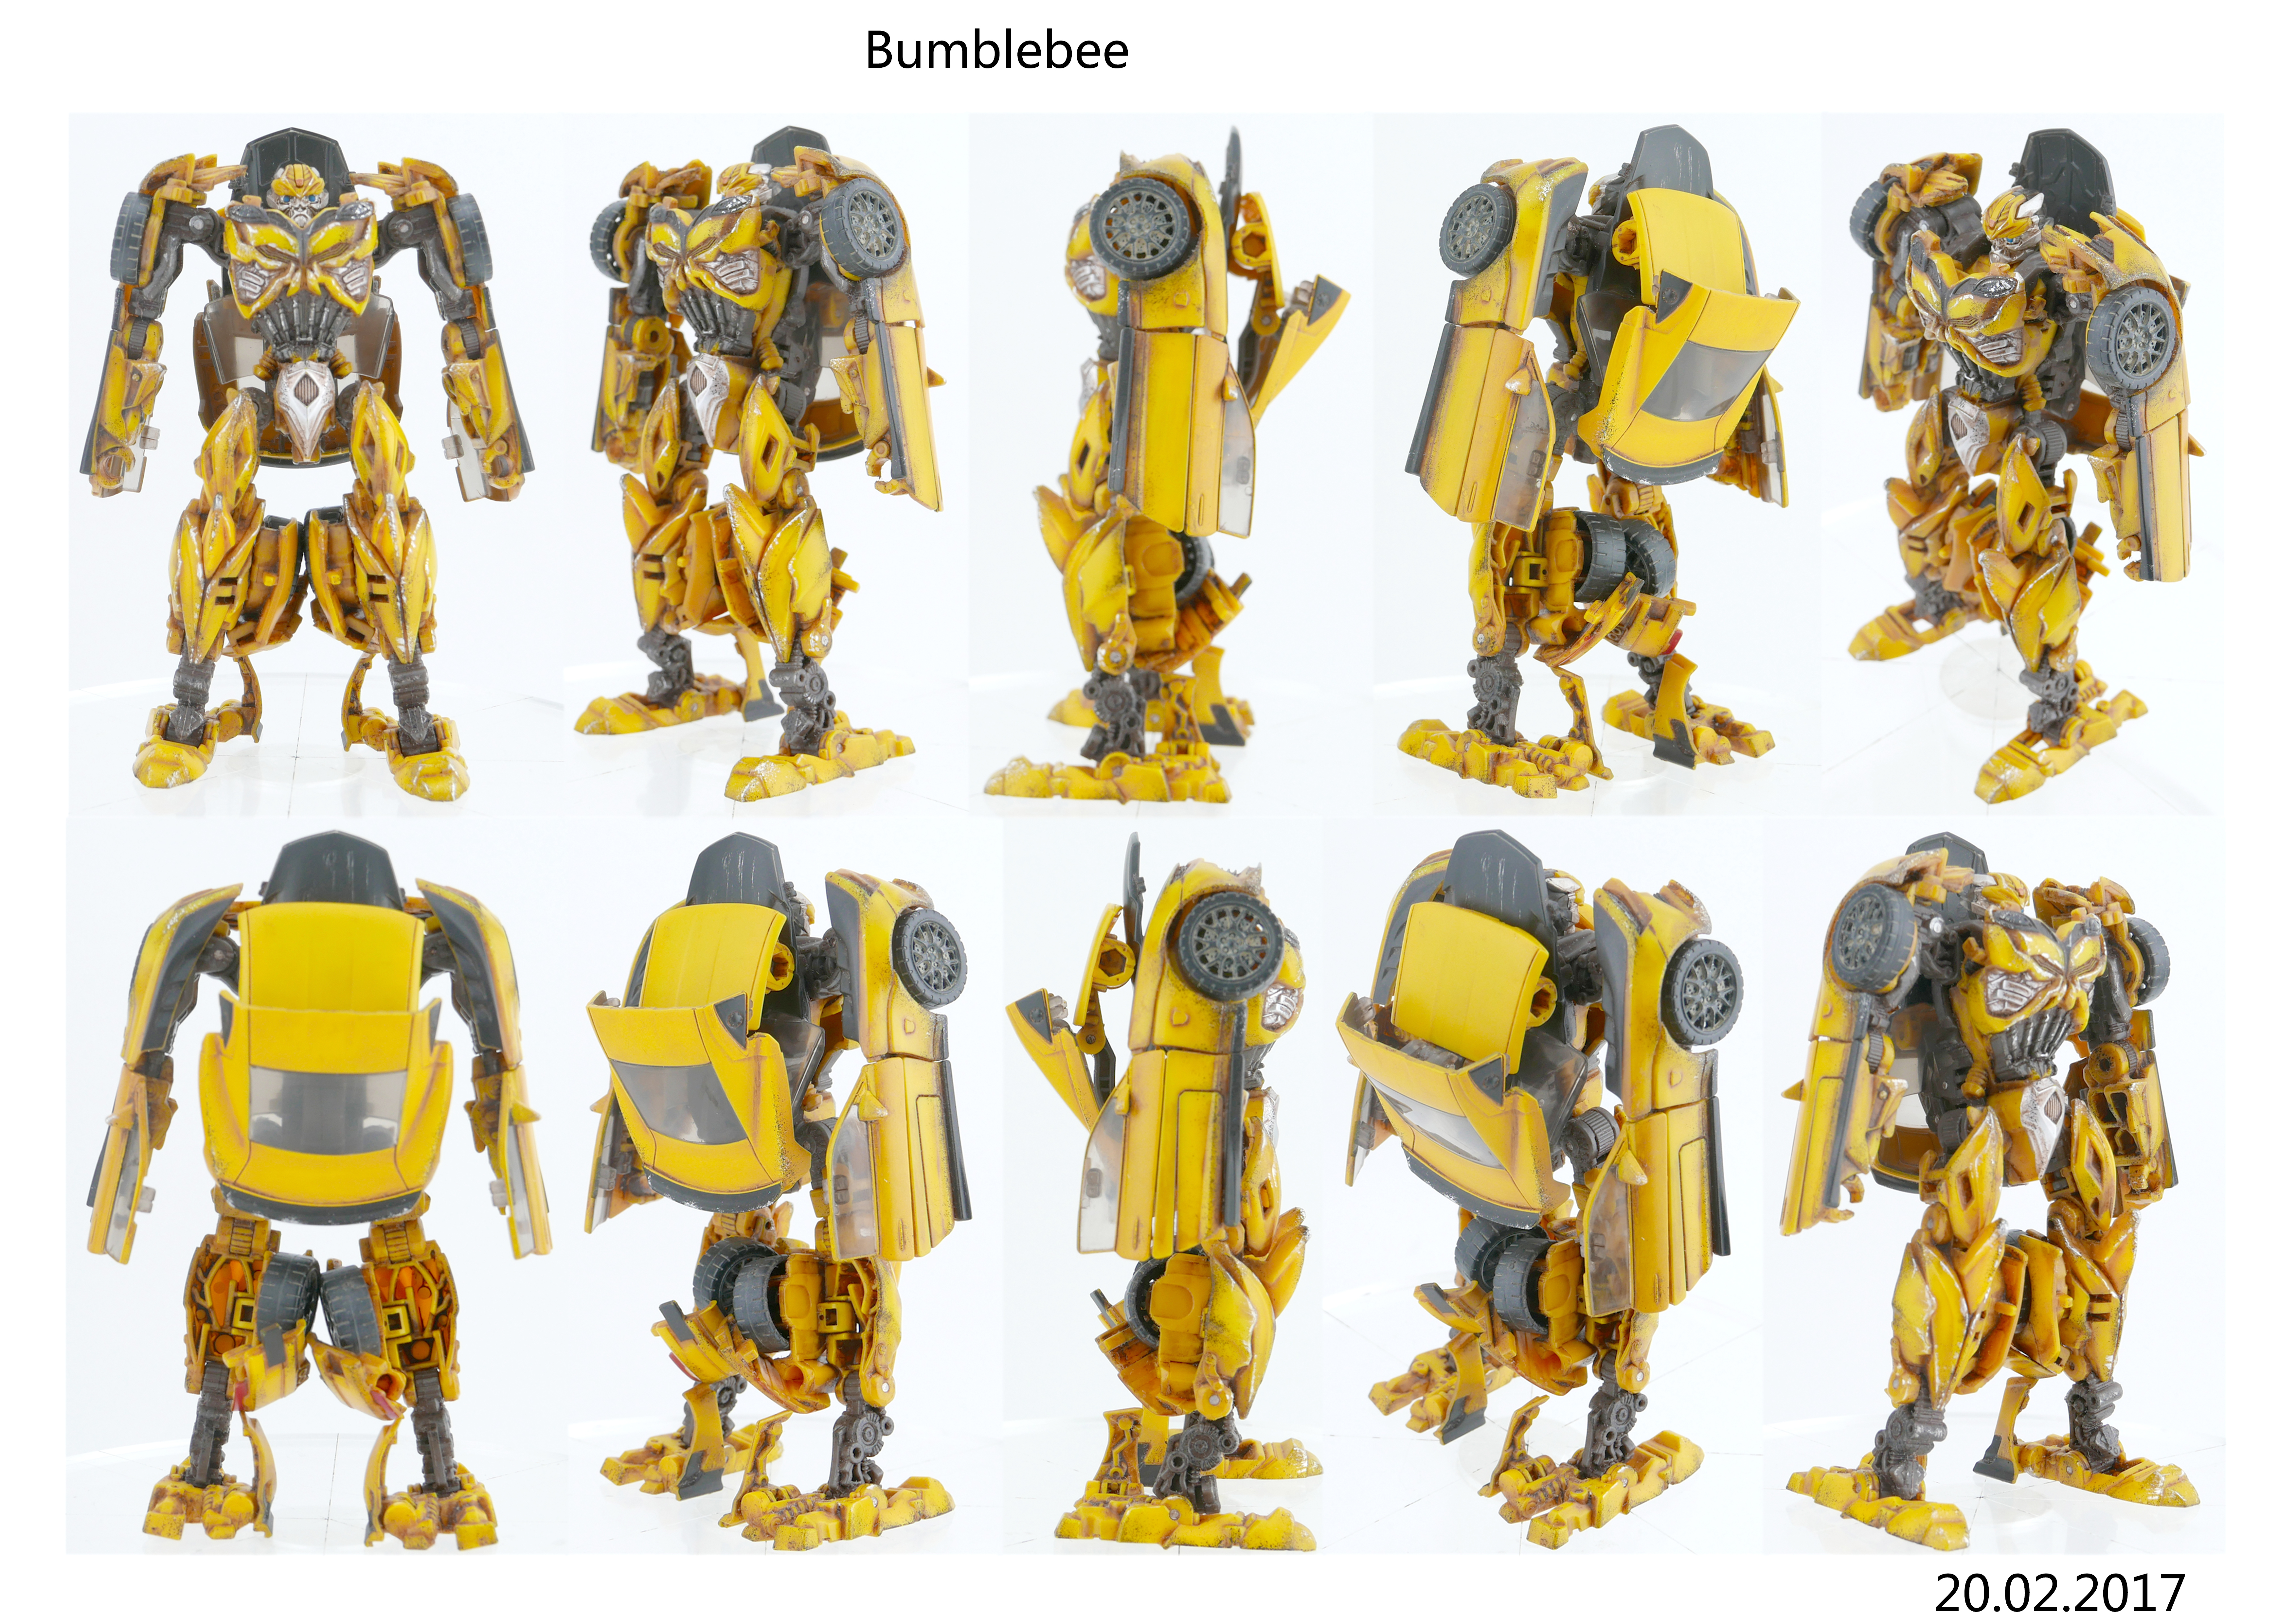 Deluxe Bumblebee giveaway at Midnight Madness event (Hasbro Singapore)